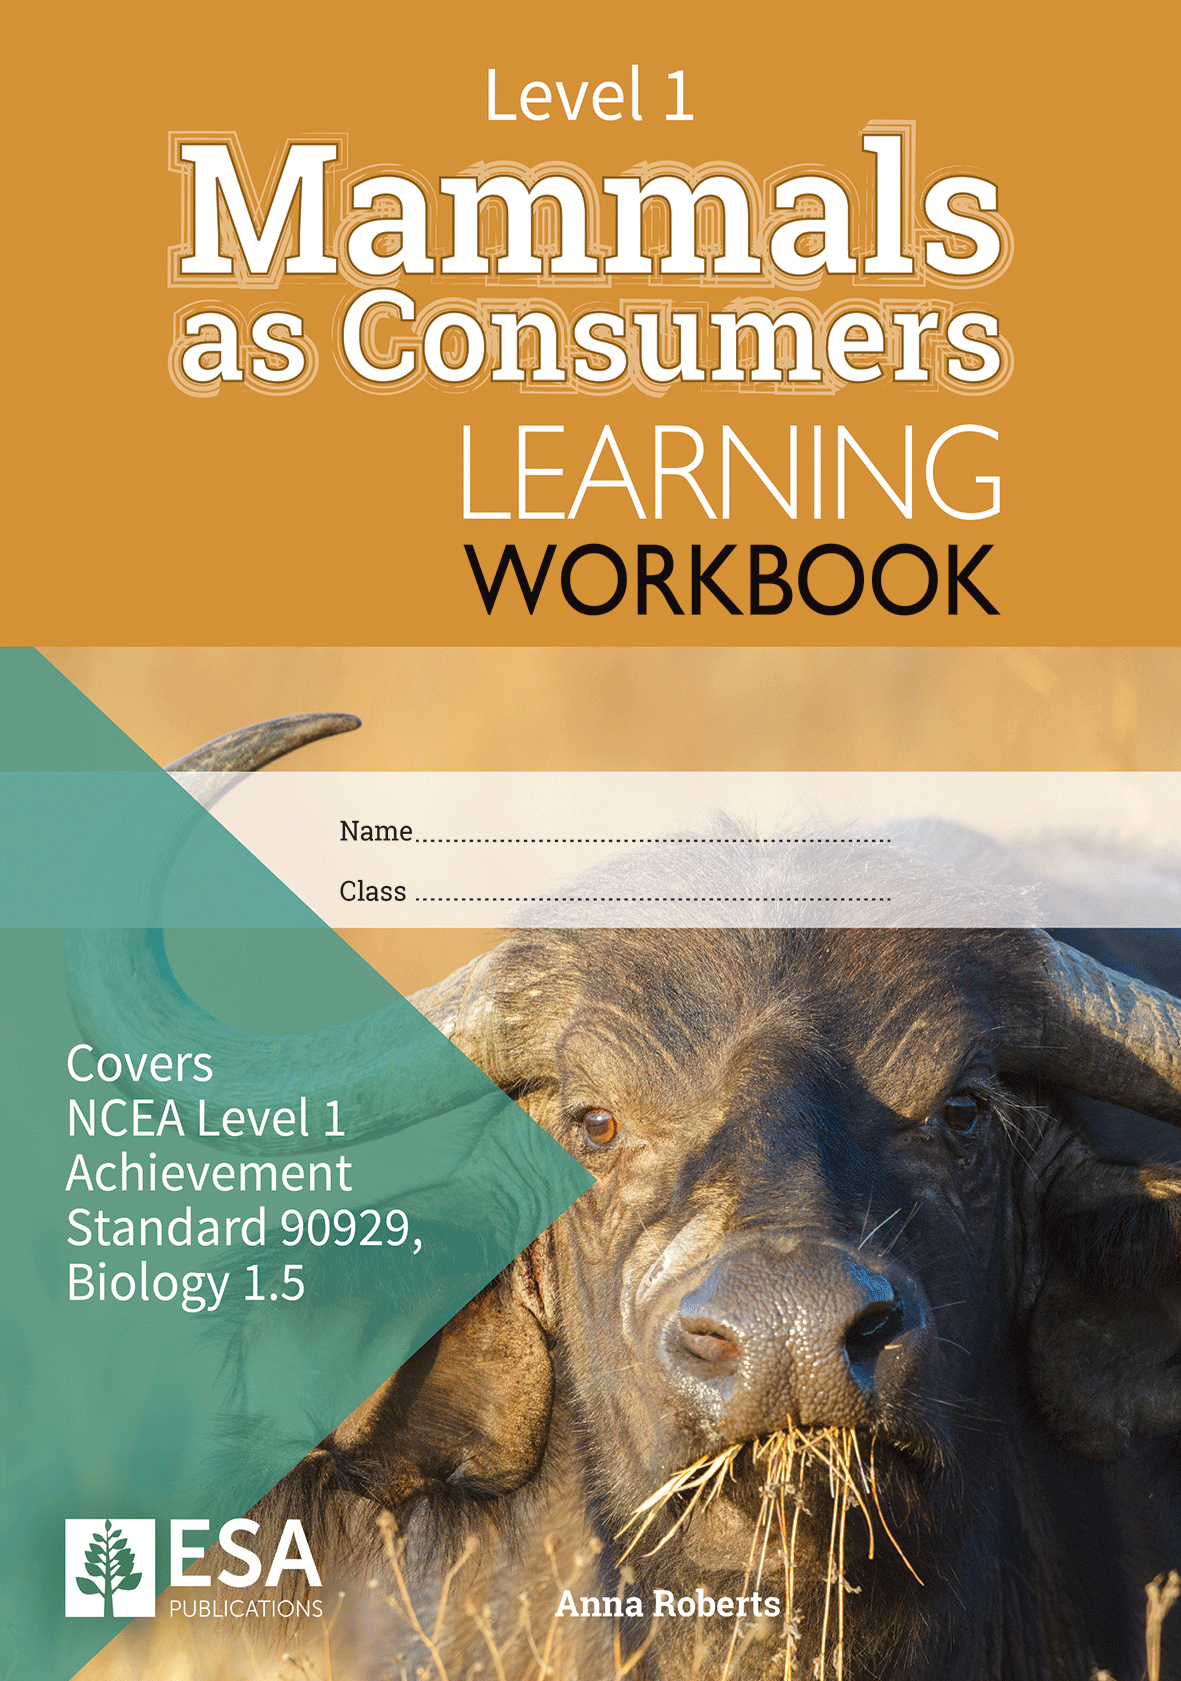 Level 1 Mammals as Consumers 1.5 Learning Workbook